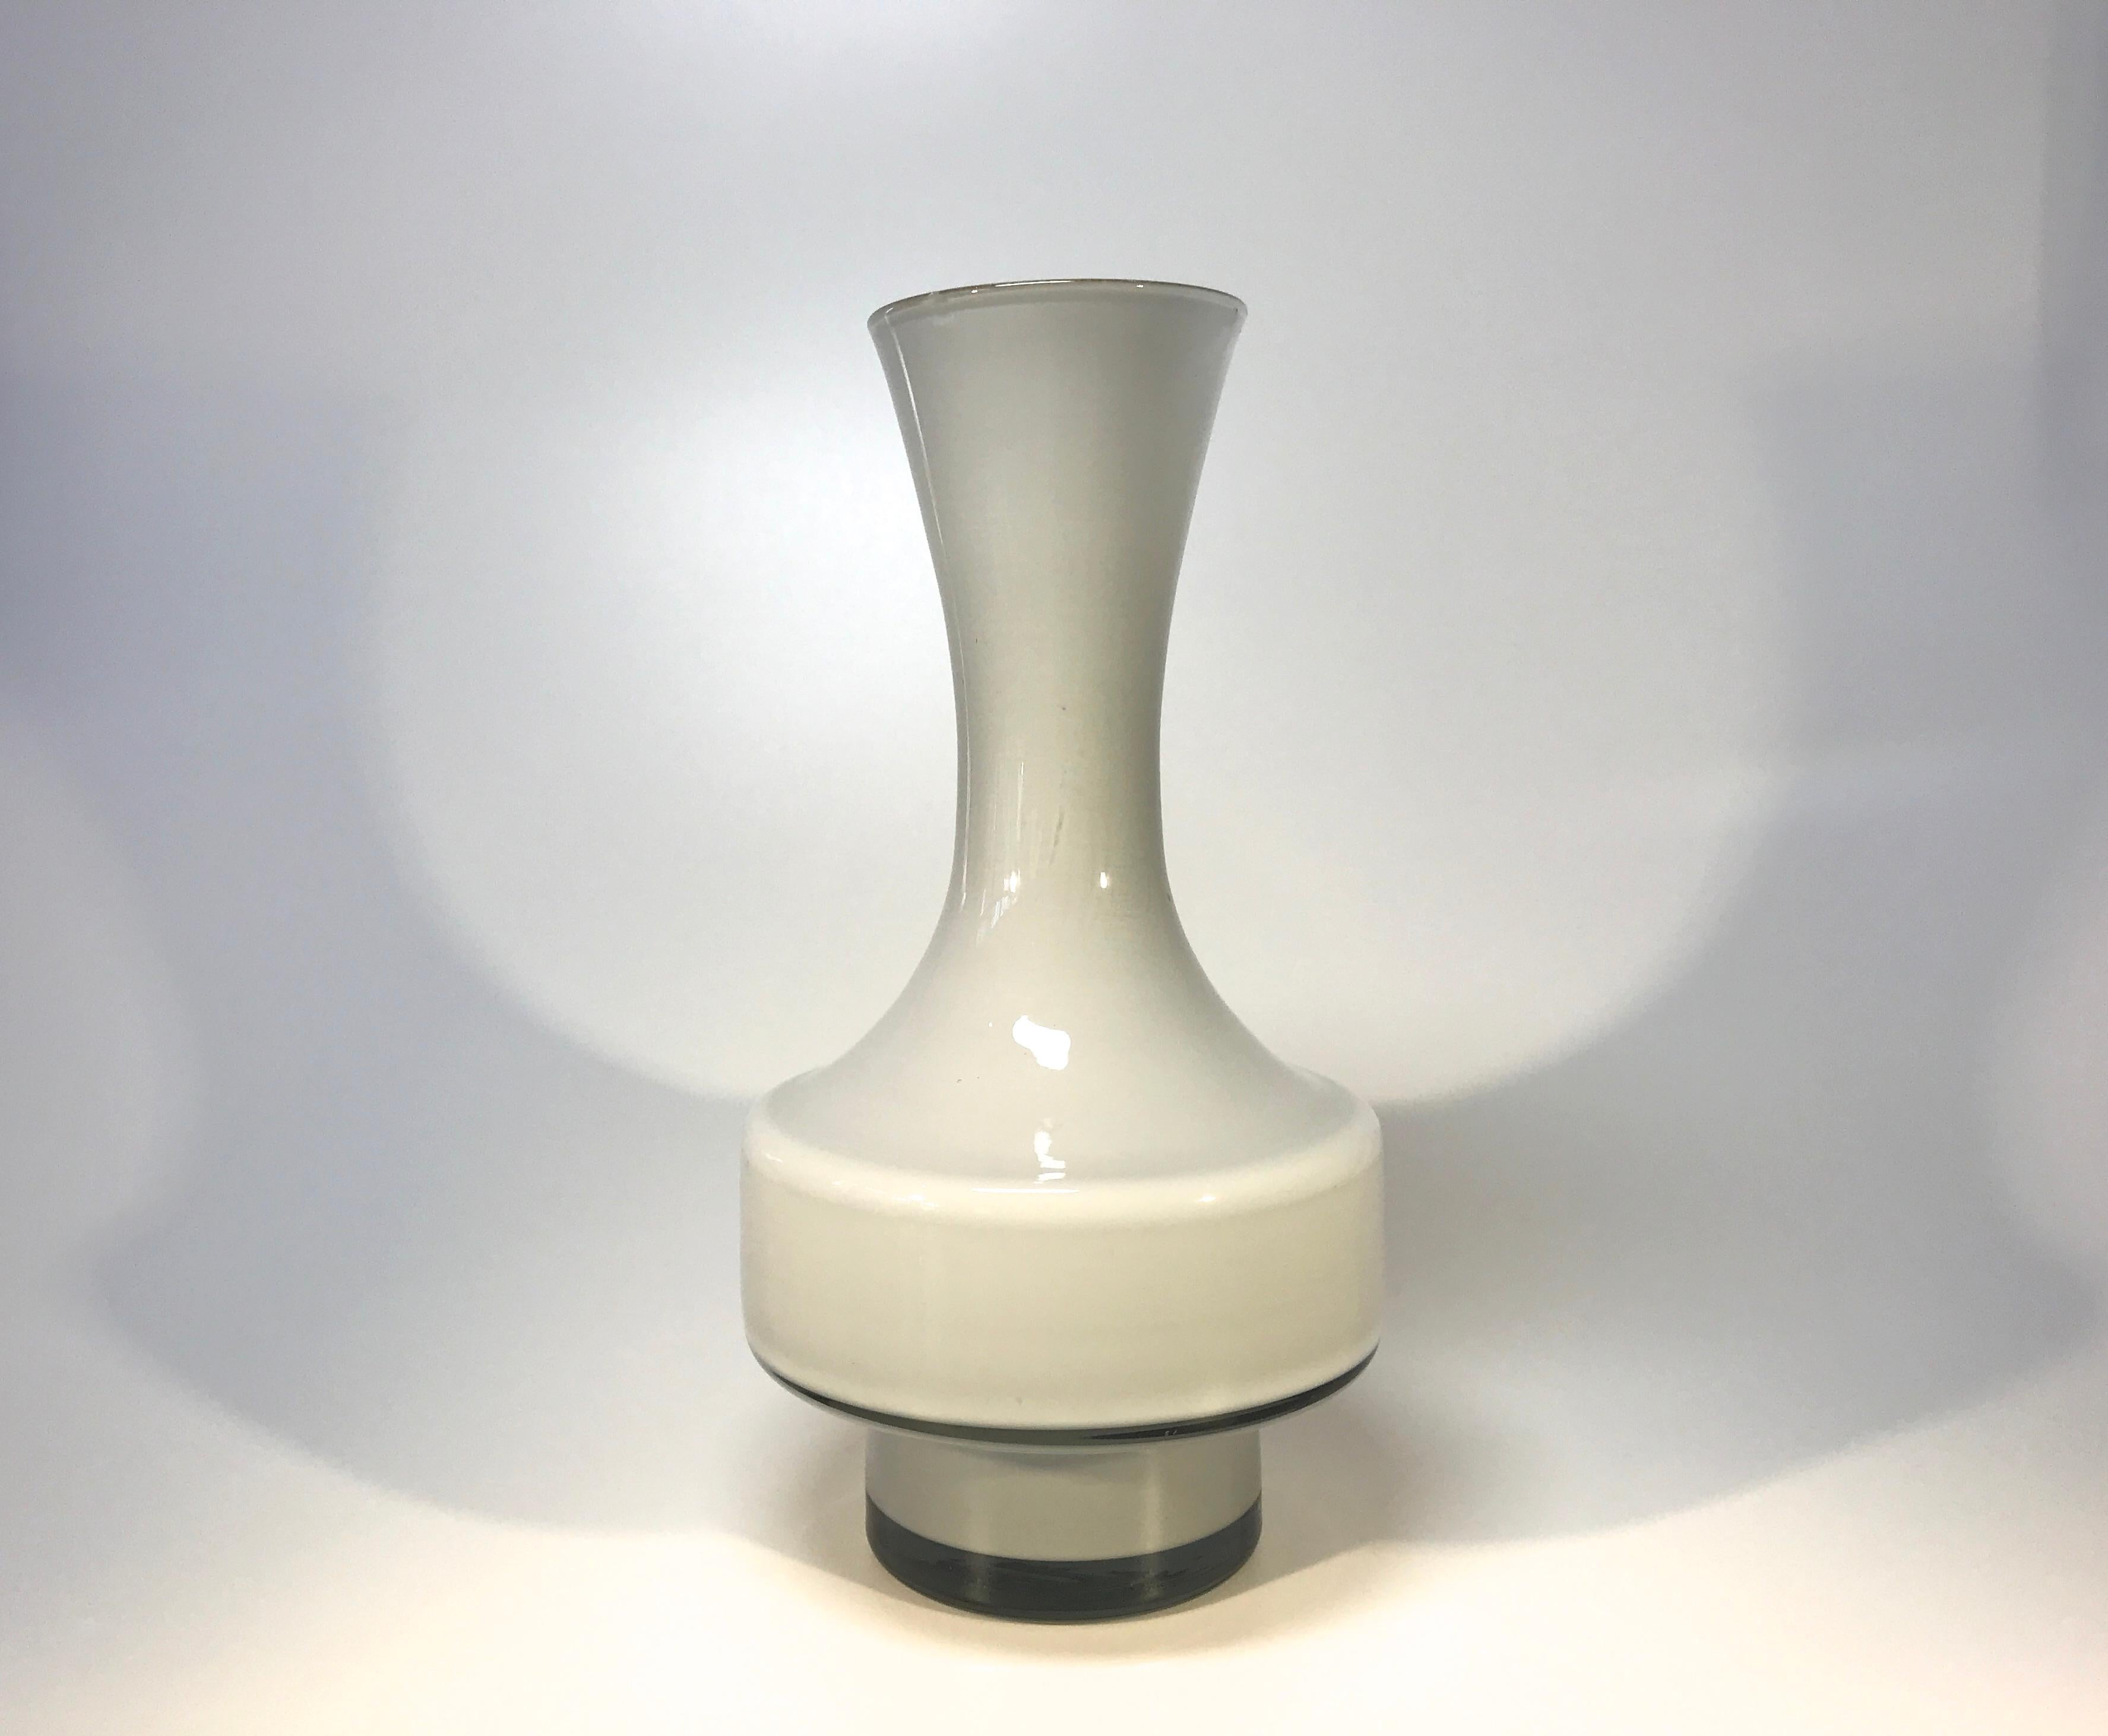 Understated soft dove grey shaped glass vase from vintage Empoli, Italy.
A very retro styled piece - with a 'nod' to Scandinavian design
circa 1960s-1970s
Measures: Height 7.5 inch, diameter 4 inch
In very good condition.